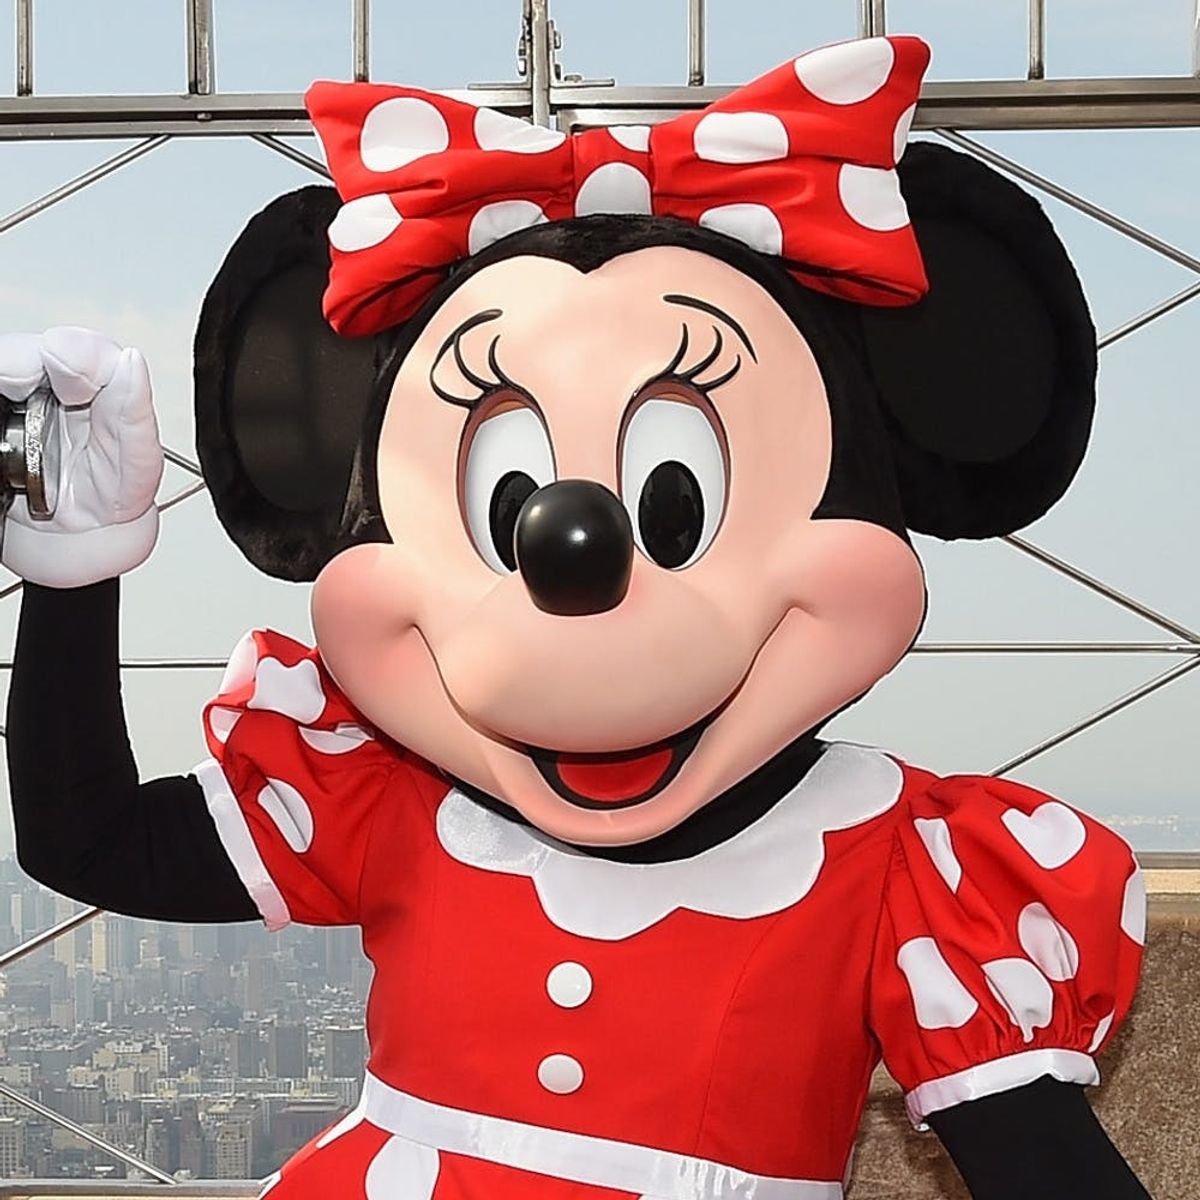 Minnie Mouse Is Finally Getting a Star on the Hollywood Walk of Fame